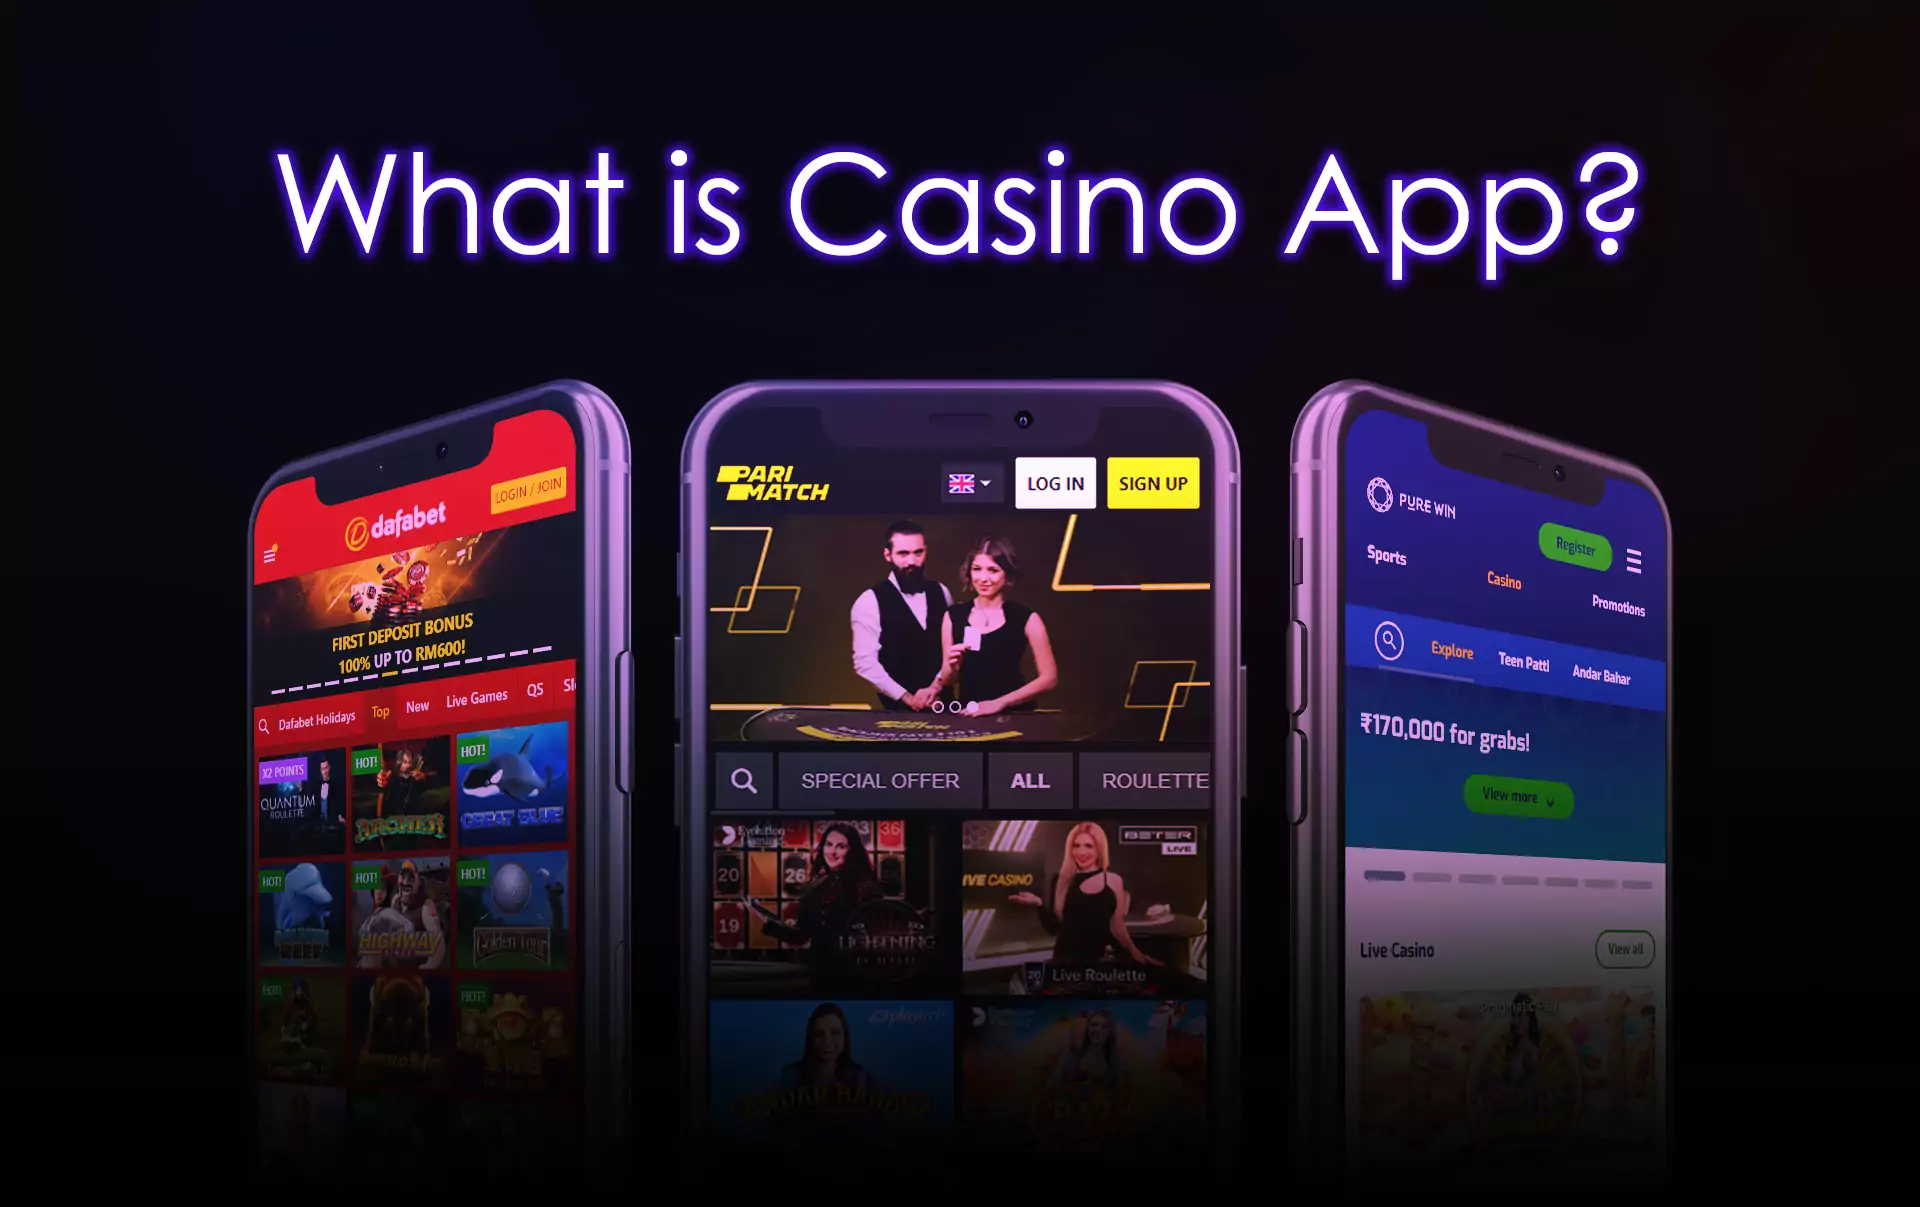 Online casino apps are designed for gambling through a smartphone.